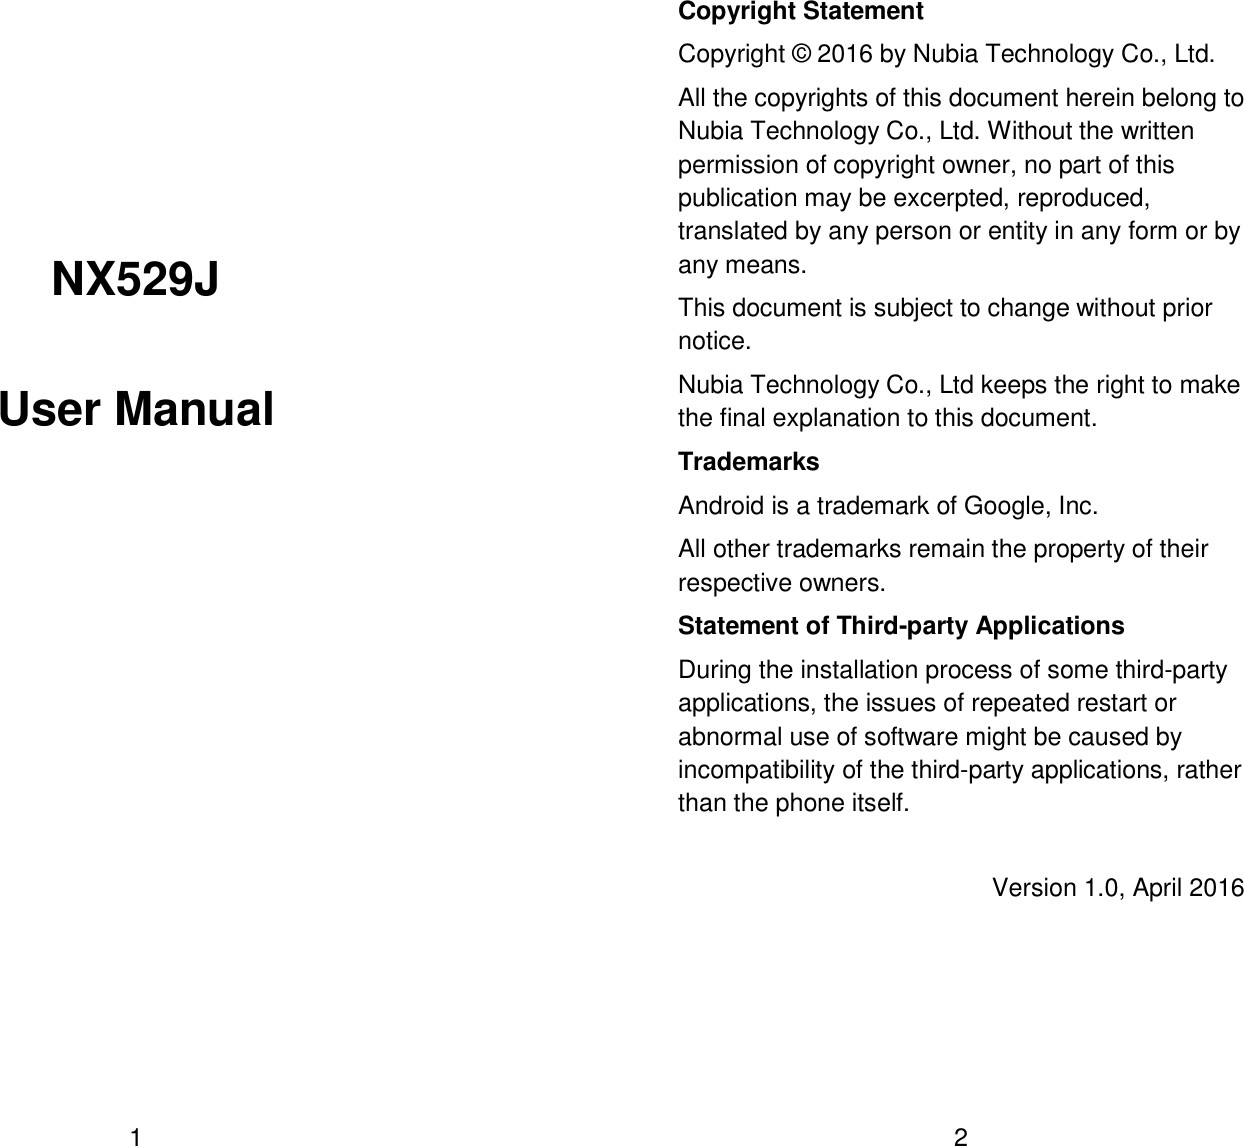  1   NX529J User Manual    2 Copyright Statement Copyright © 2016 by Nubia Technology Co., Ltd. All the copyrights of this document herein belong to Nubia Technology Co., Ltd. Without the written permission of copyright owner, no part of this publication may be excerpted, reproduced, translated by any person or entity in any form or by any means. This document is subject to change without prior notice. Nubia Technology Co., Ltd keeps the right to make the final explanation to this document. Trademarks Android is a trademark of Google, Inc. All other trademarks remain the property of their respective owners. Statement of Third-party Applications During the installation process of some third-party applications, the issues of repeated restart or abnormal use of software might be caused by incompatibility of the third-party applications, rather than the phone itself. Version 1.0, April 2016 